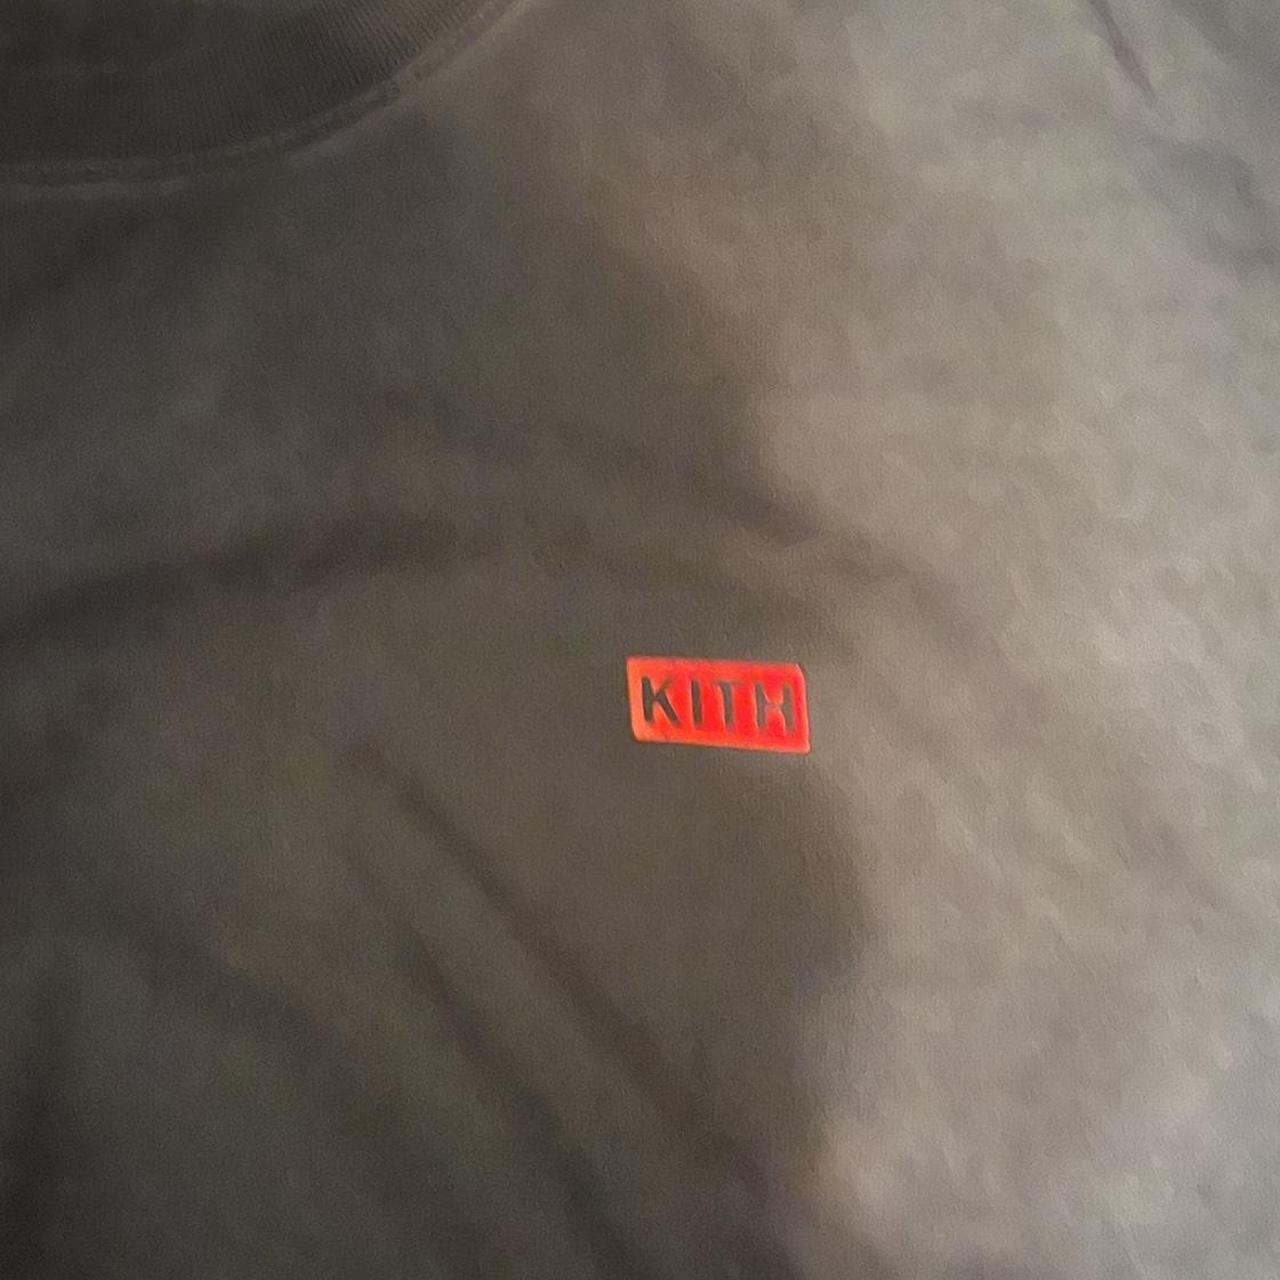 Black Kith shirt with red logo. Check out my... - Depop